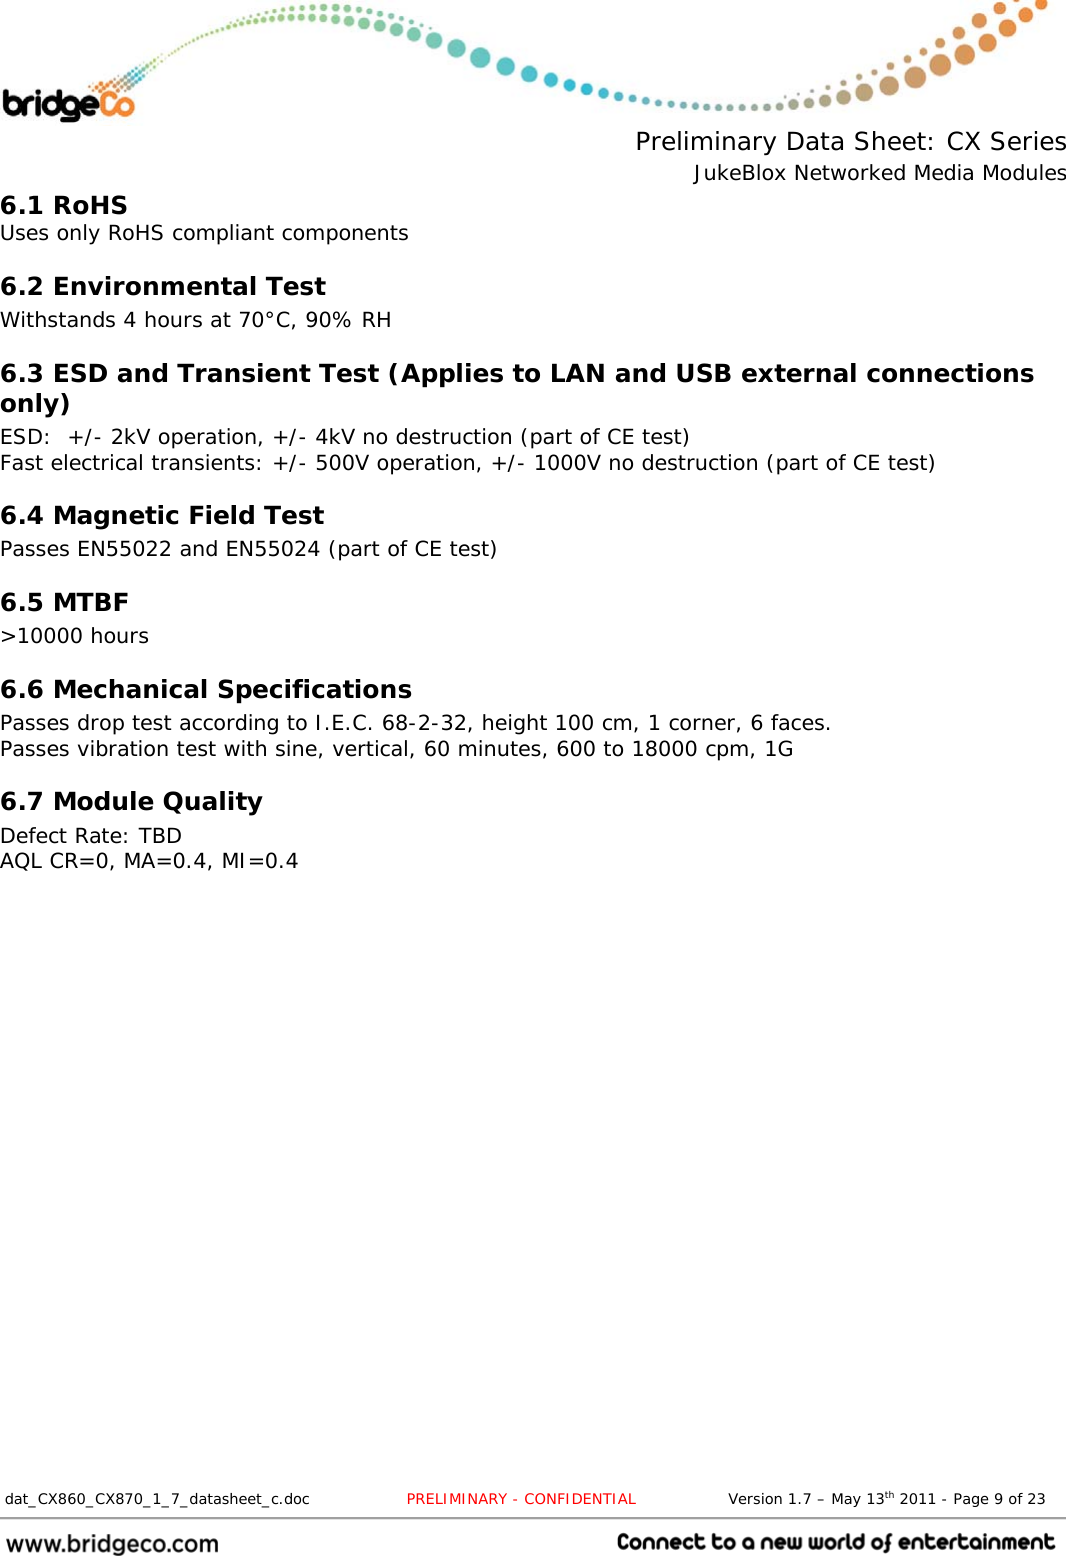  Preliminary Data Sheet: CX Series JukeBlox Networked Media Modules  dat_CX860_CX870_1_7_datasheet_c.doc                   PRELIMINARY - CONFIDENTIAL                  Version 1.7 – May 13th 2011 - Page 9 of 23                                 6.1 RoHS Uses only RoHS compliant components 6.2 Environmental Test Withstands 4 hours at 70°C, 90% RH 6.3 ESD and Transient Test (Applies to LAN and USB external connections only) ESD:  +/- 2kV operation, +/- 4kV no destruction (part of CE test) Fast electrical transients: +/- 500V operation, +/- 1000V no destruction (part of CE test) 6.4 Magnetic Field Test Passes EN55022 and EN55024 (part of CE test) 6.5 MTBF &gt;10000 hours 6.6 Mechanical Specifications Passes drop test according to I.E.C. 68-2-32, height 100 cm, 1 corner, 6 faces. Passes vibration test with sine, vertical, 60 minutes, 600 to 18000 cpm, 1G 6.7 Module Quality Defect Rate: TBD AQL CR=0, MA=0.4, MI=0.4 